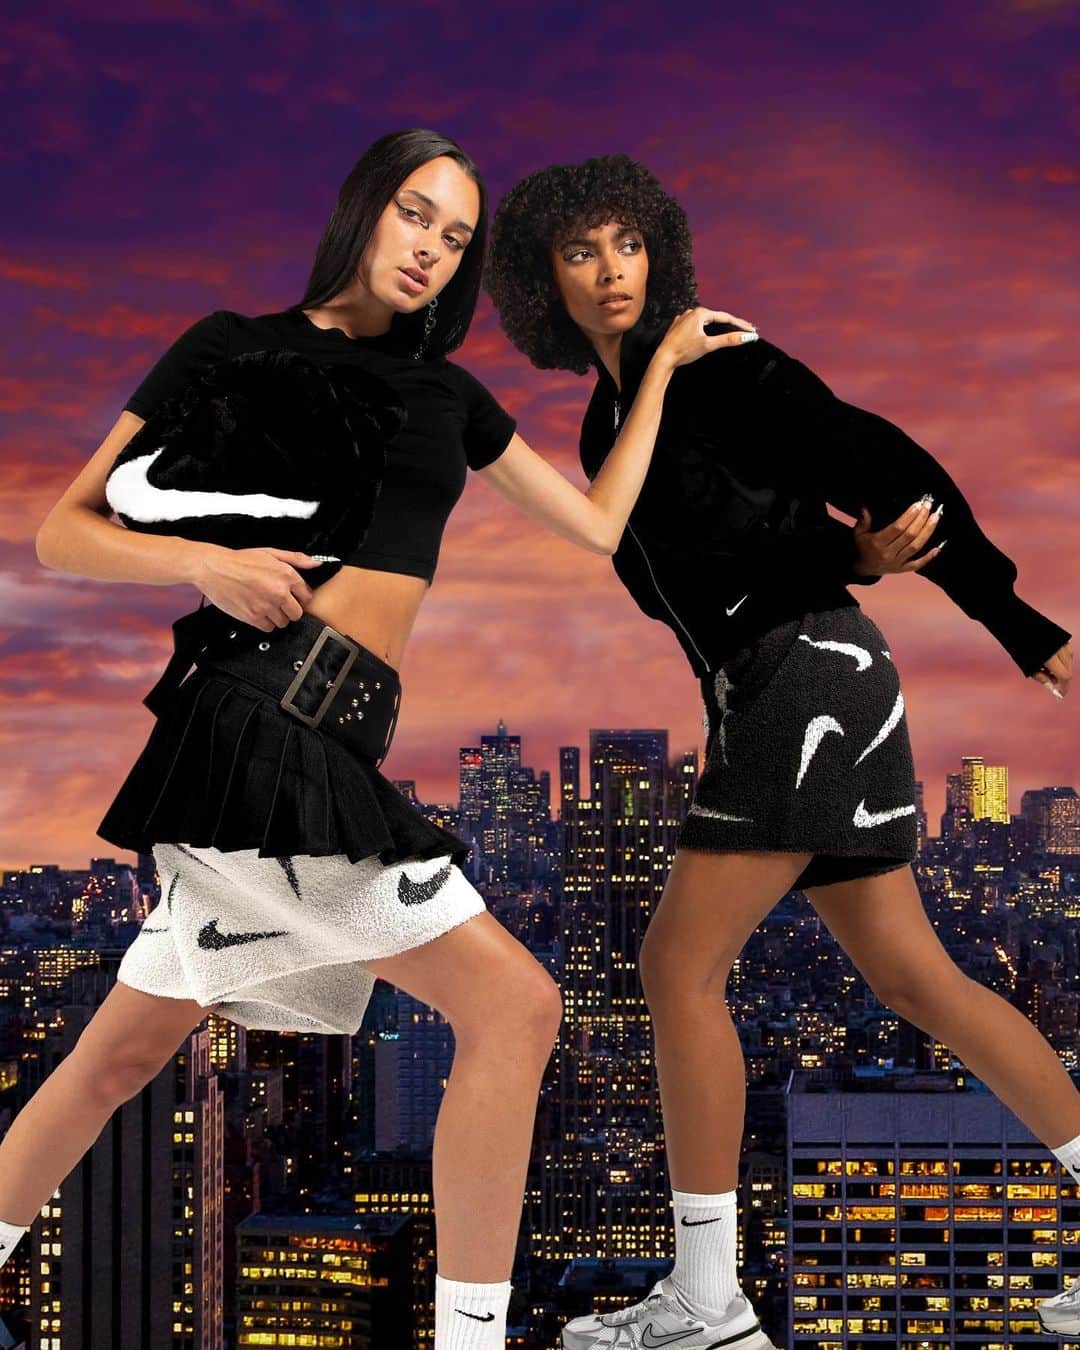 NikeNYCのインスタグラム：「It's more than just sportswear; it's a lifestyle. @nikenyc partners with @primadonnazine to create a world of individuality through clothing. Join the Nike x Primadonna Zine celebration and let your style narrate your unique story.  Cover models: @myaawest @julianna.lombardo   Stylists: @angiehiness @monb0n Assistant Stylist: @briannatirado Makeup Artists: @brooke.harry.artistry, @makeupbygilliant, @robinstrightnyc Hair Stylists: @divine.laboratory, @hairby.rhia Nail Artists: @_mean_queen_nailsandtattoos_ , @prettychromednails Photo Assistants: @neukiid, @tiwa.neo Fashion Styling Interns: @isabelladianaa @mlbells @gabbyhannley @not.nikaa Featured garments: @nikewomen, @prettypoisonbunnys, @ying_fll, @arishnikov, @rencorporation, @zemeta_official, @tacky_girlz_, @dauphinette.nyc, @pipencolorena, @tdmale_, @iamnovazo, @holiknyc, @anjaceciliashop, @coralinnea, @jadedmade, @beepybella, @maisonde.fous, @goodsport.xyz, @koven2024, @is_xahla, @__sentimiento, @beaconscloset, @trashandvaudeville, @genzero_official, @cycl_d, @madeline.porterfield.knitwear」